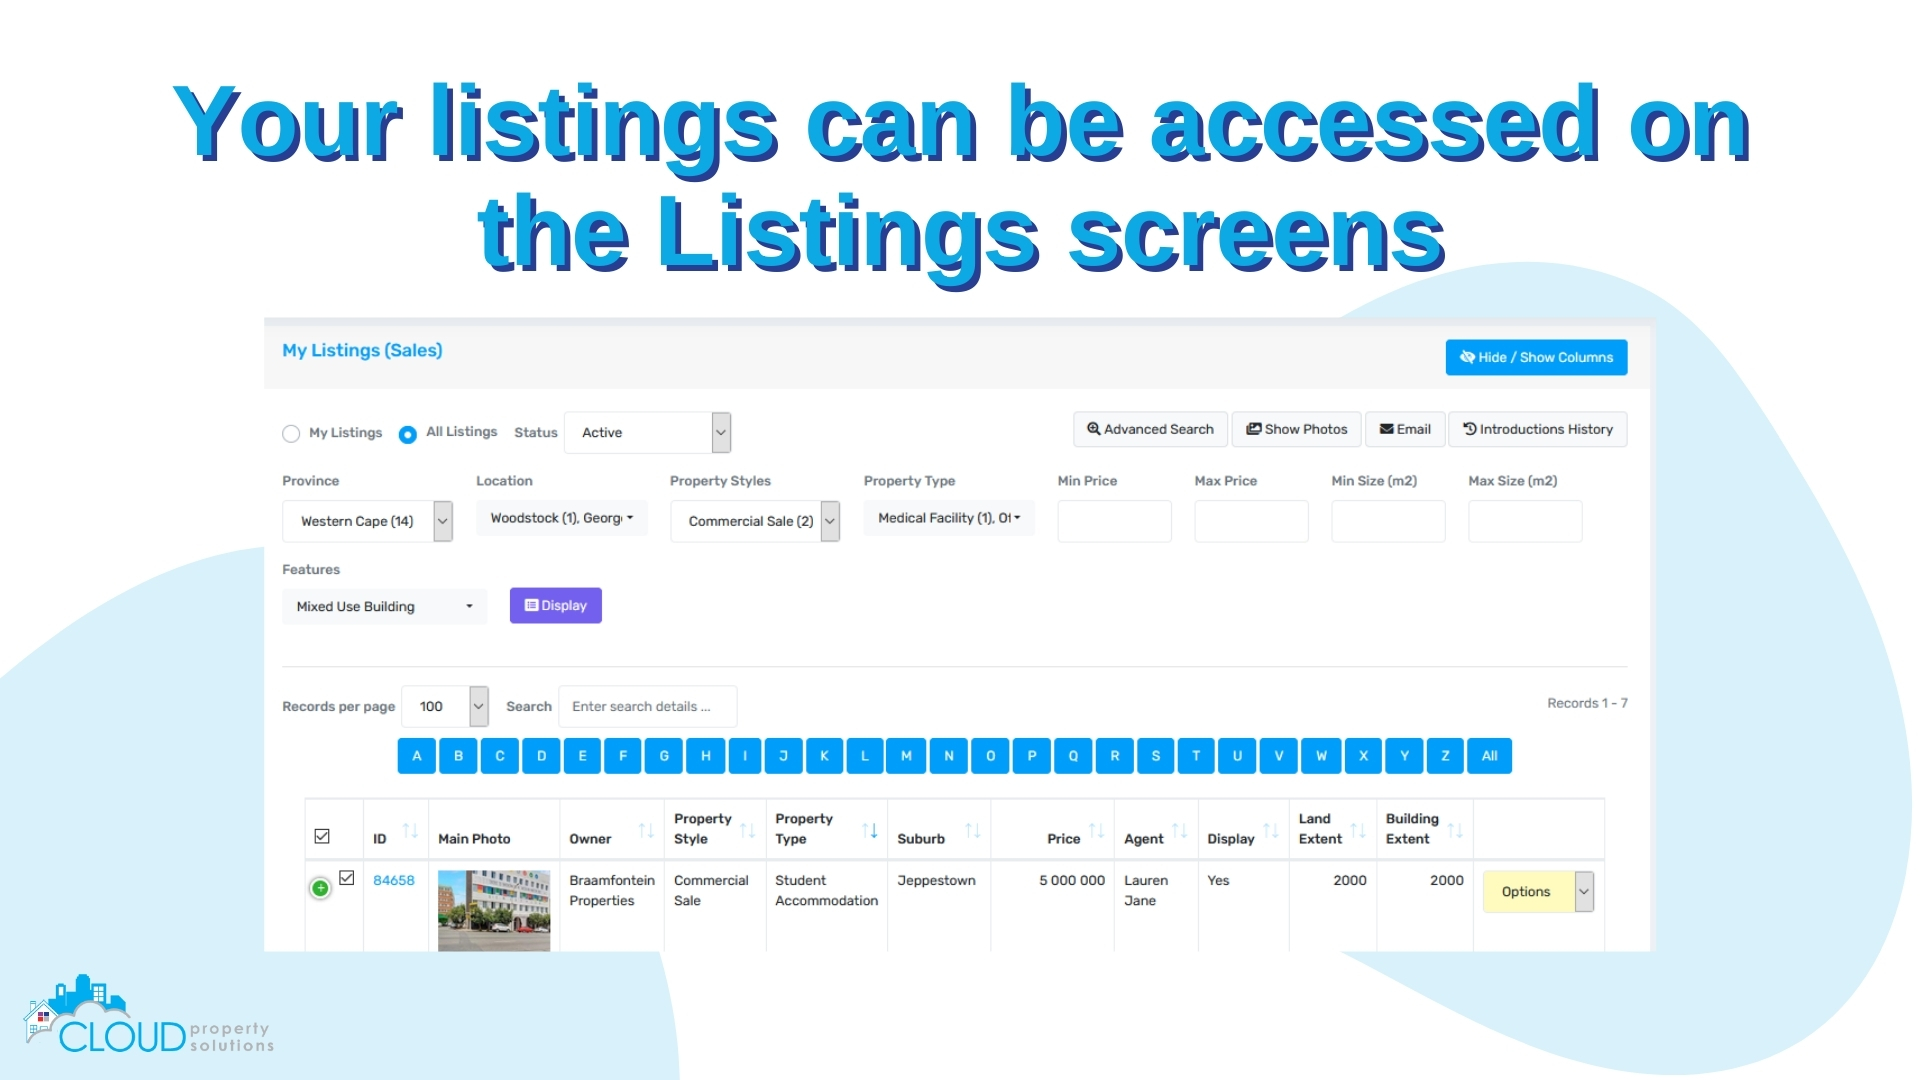 Your listings can be accessed on the Listings screens